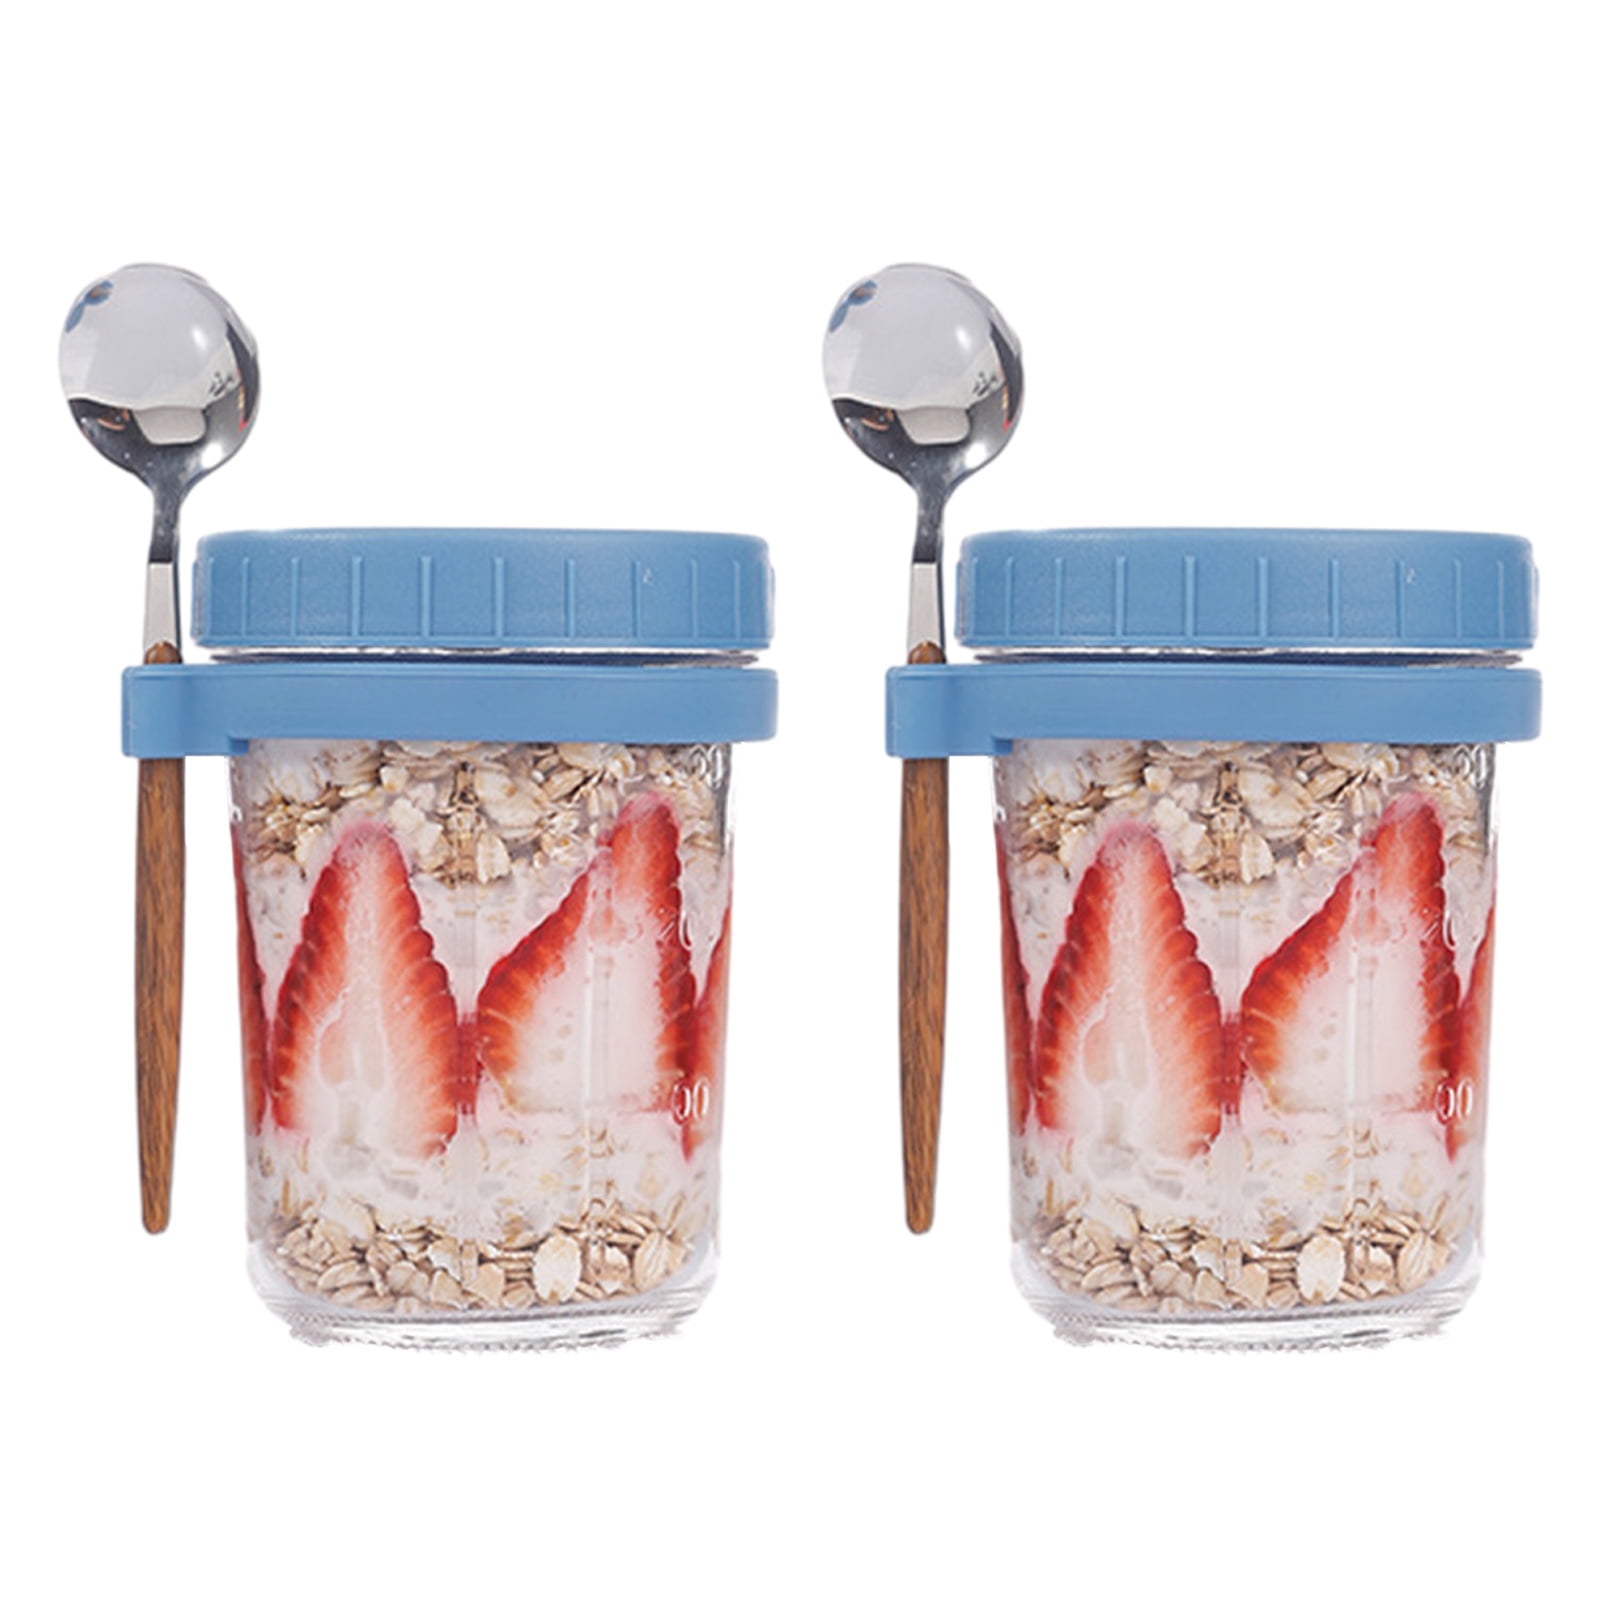 LINASHI Overnight Oats Containers 2 Pcs 350ml Oatmeal Cup Glass Containers  with Lids Spoons Airtight Breakfast Meal Prep Container for Overnight Oats